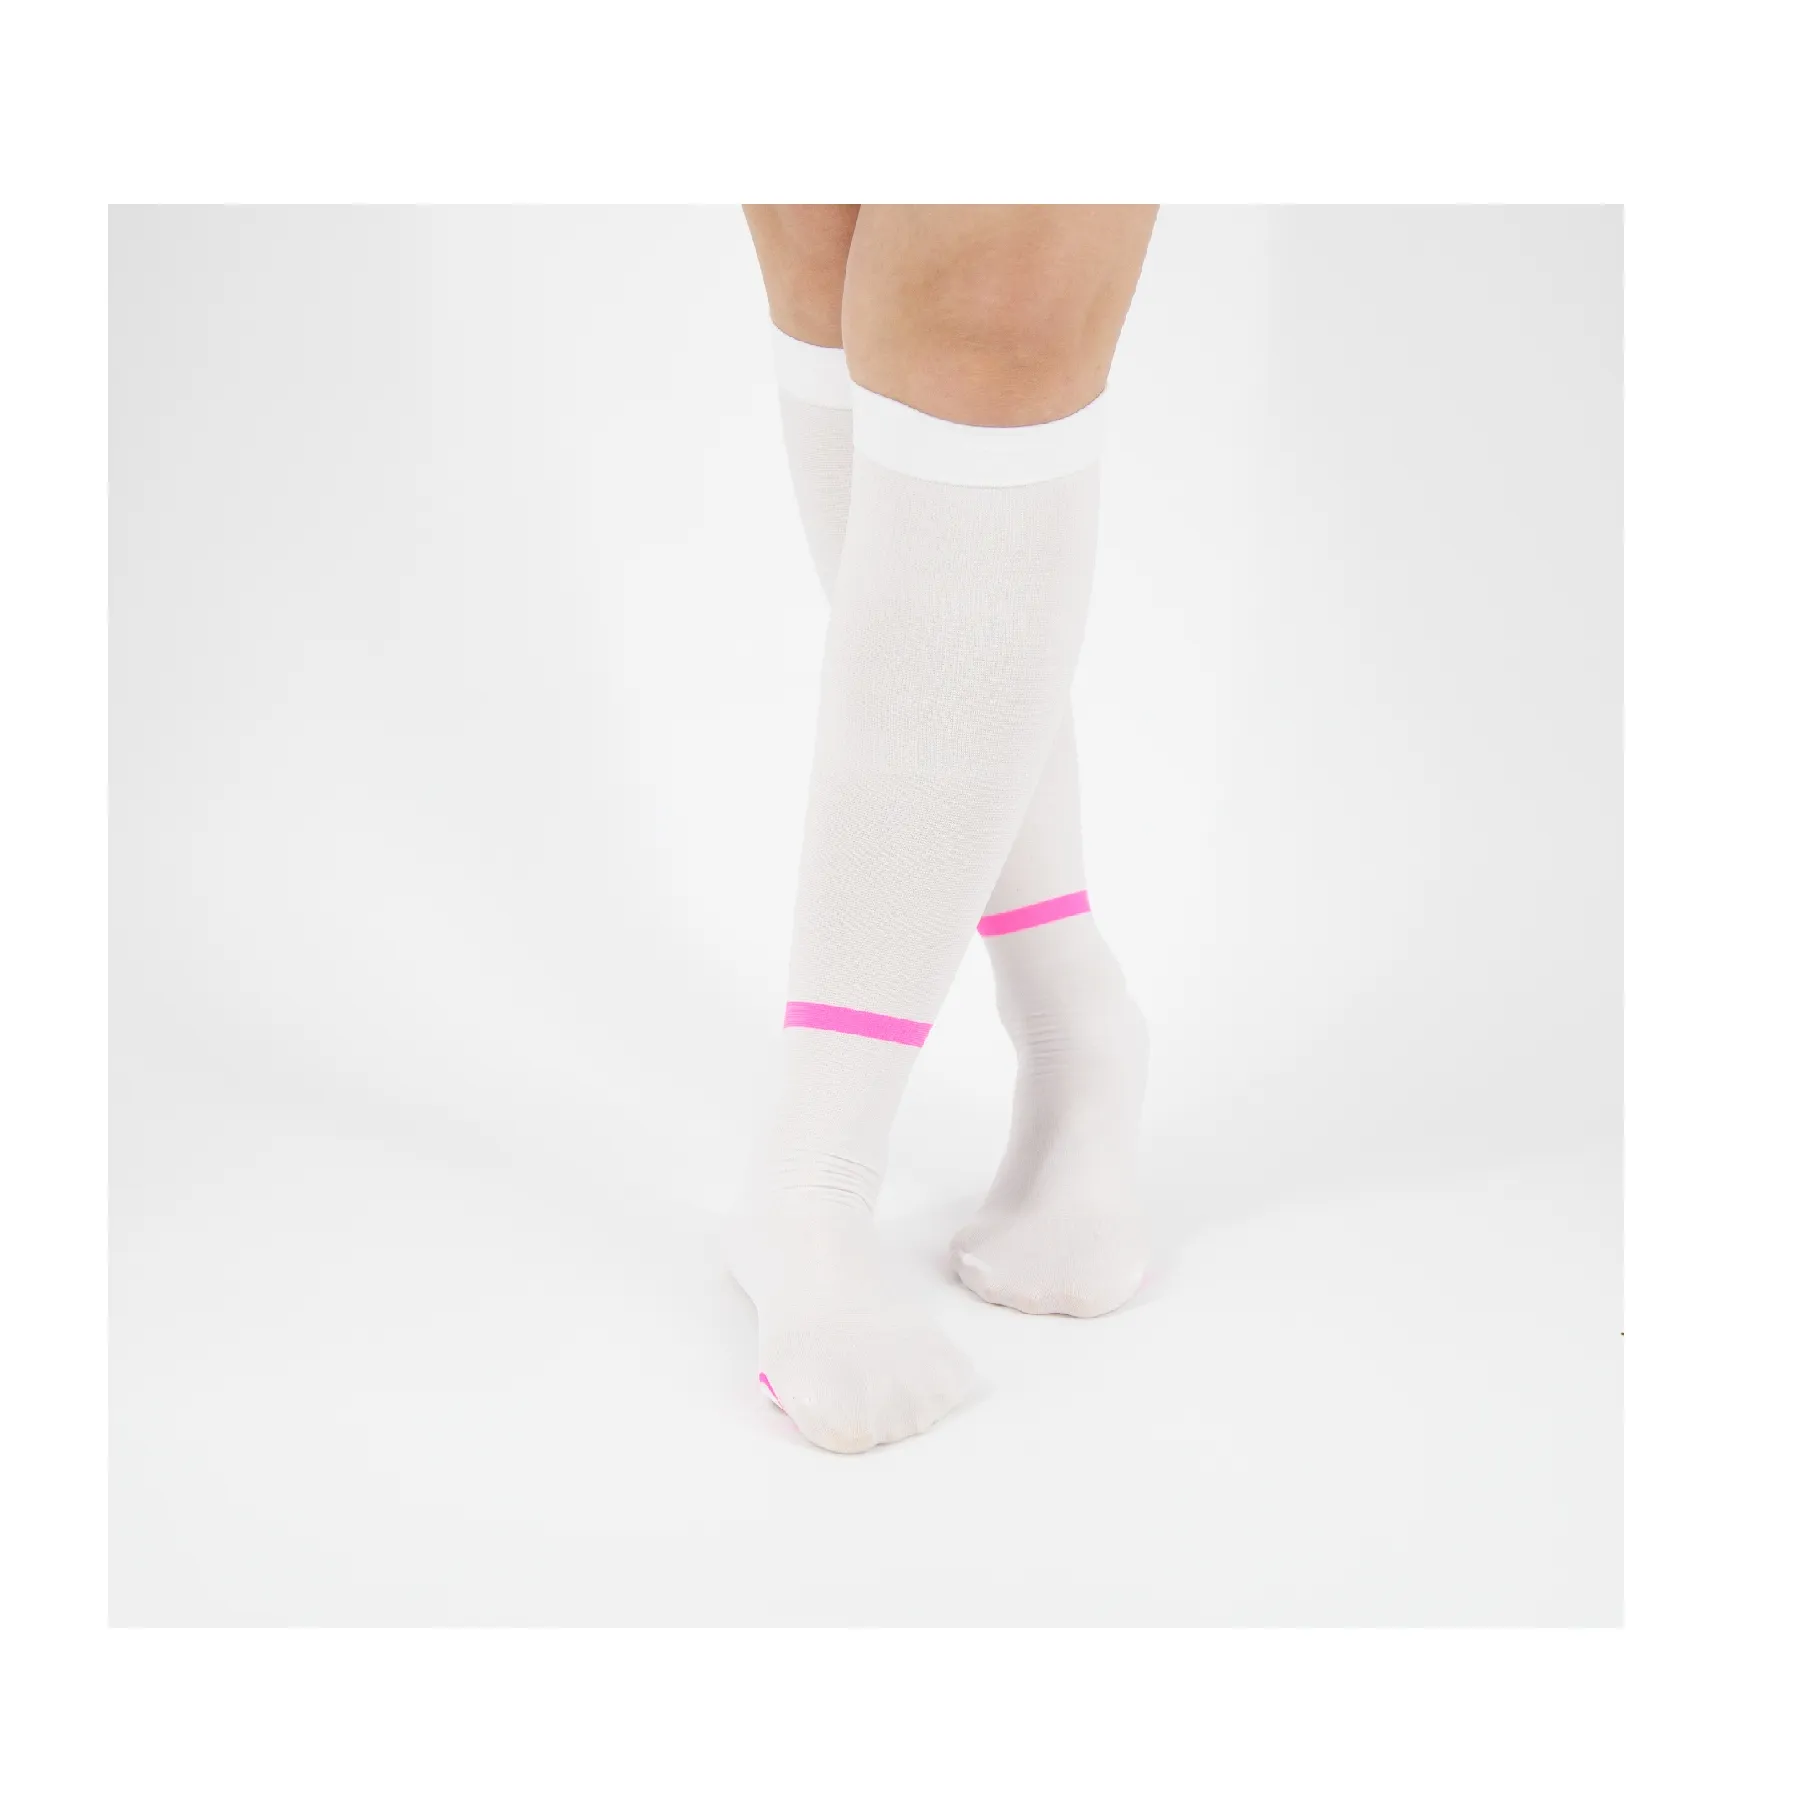 Anti dvt 1000embolism medical knee high compression stockings -knee high - White and Pink export from Vietnam